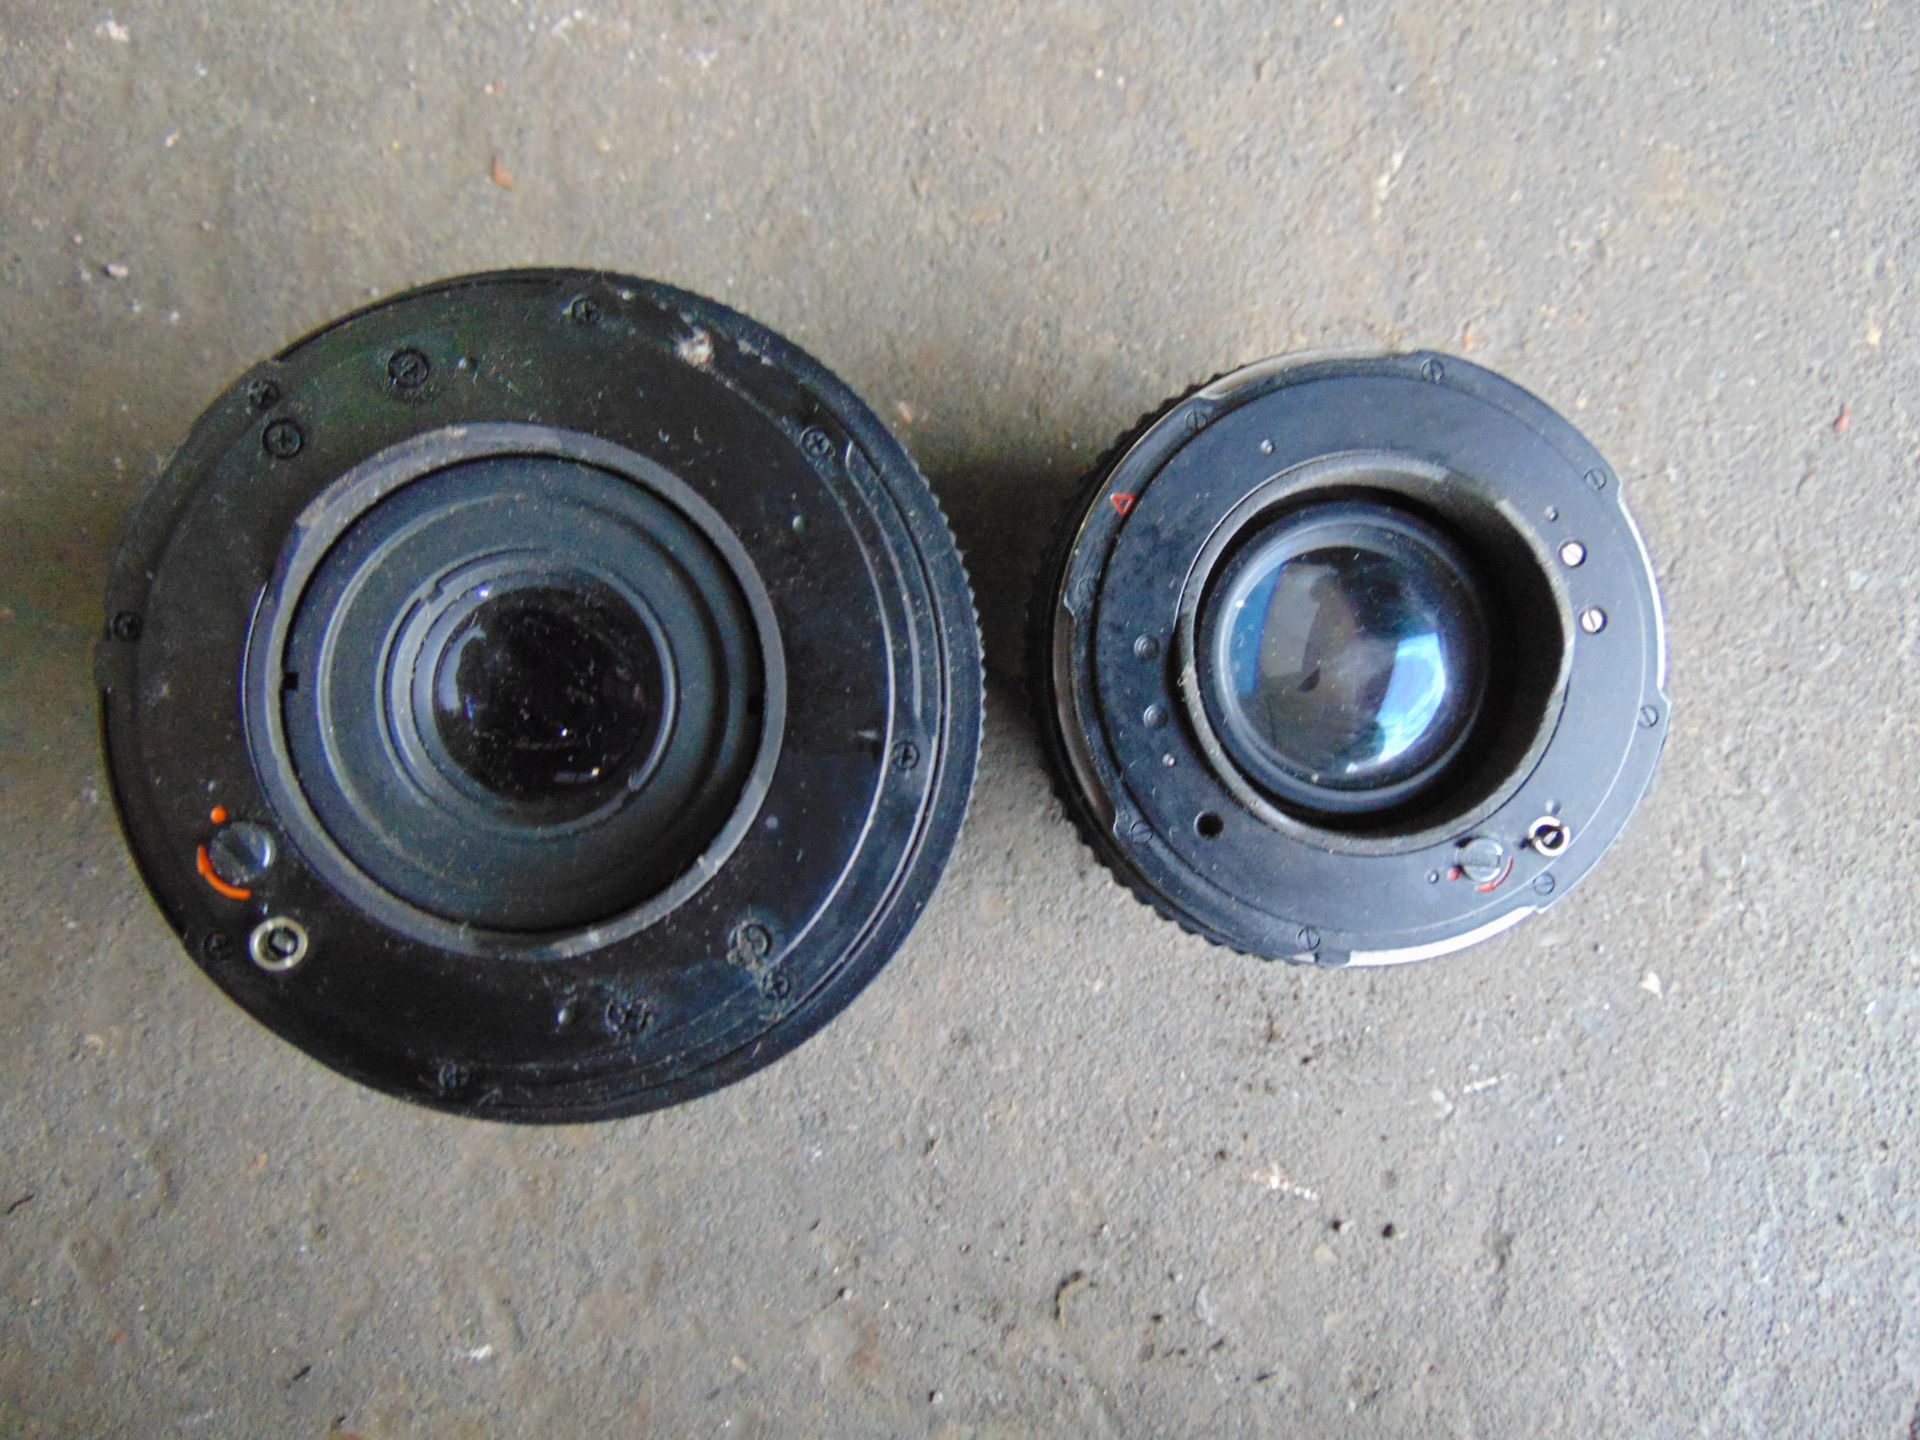 2 x Carl Zeiss Camera Lenses - Image 6 of 6